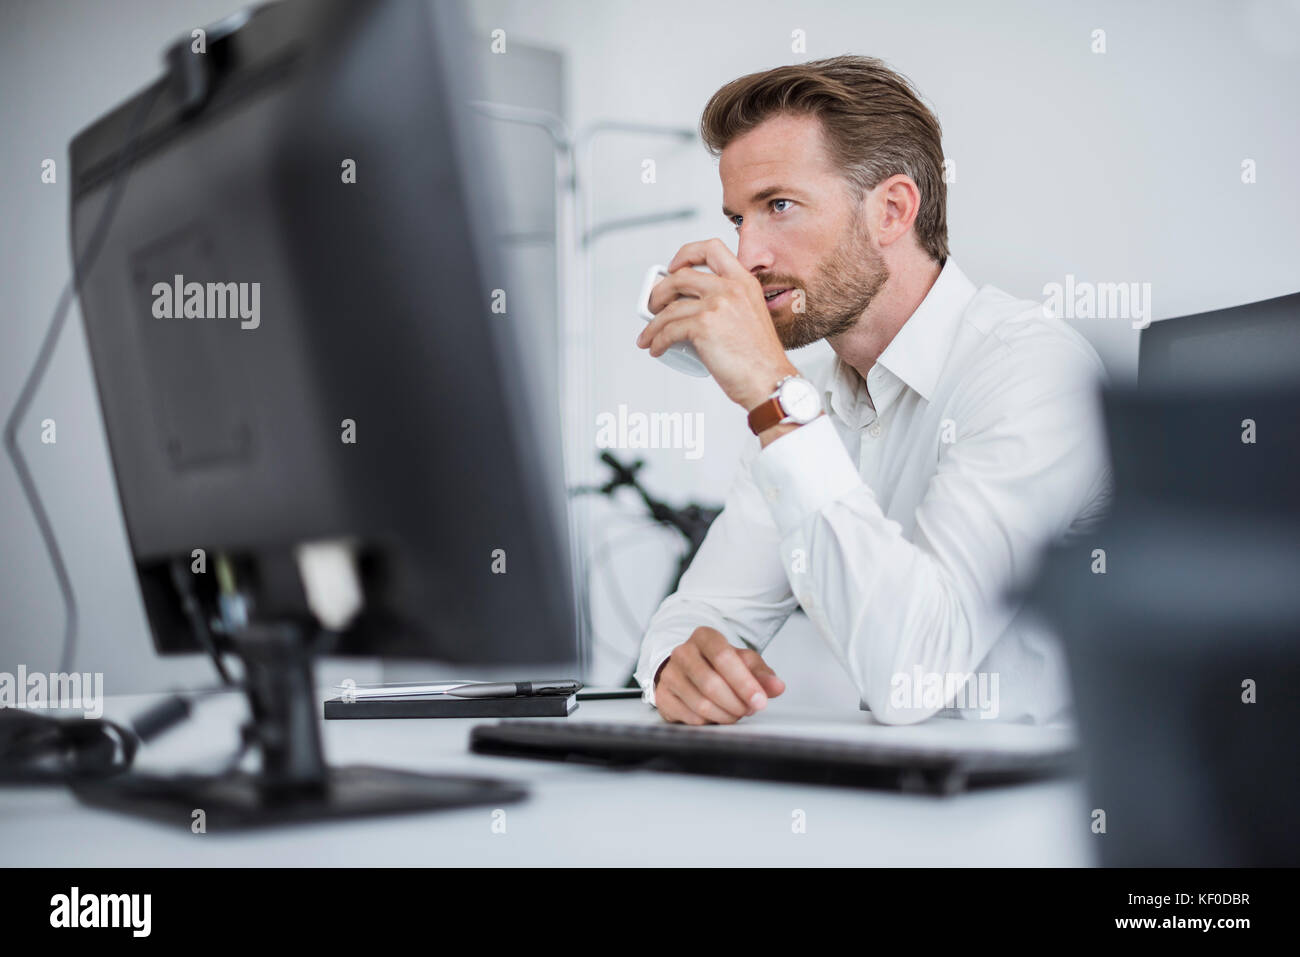 Portrait of serious businessman sitting at desk in the office drinking coffee Stock Photo